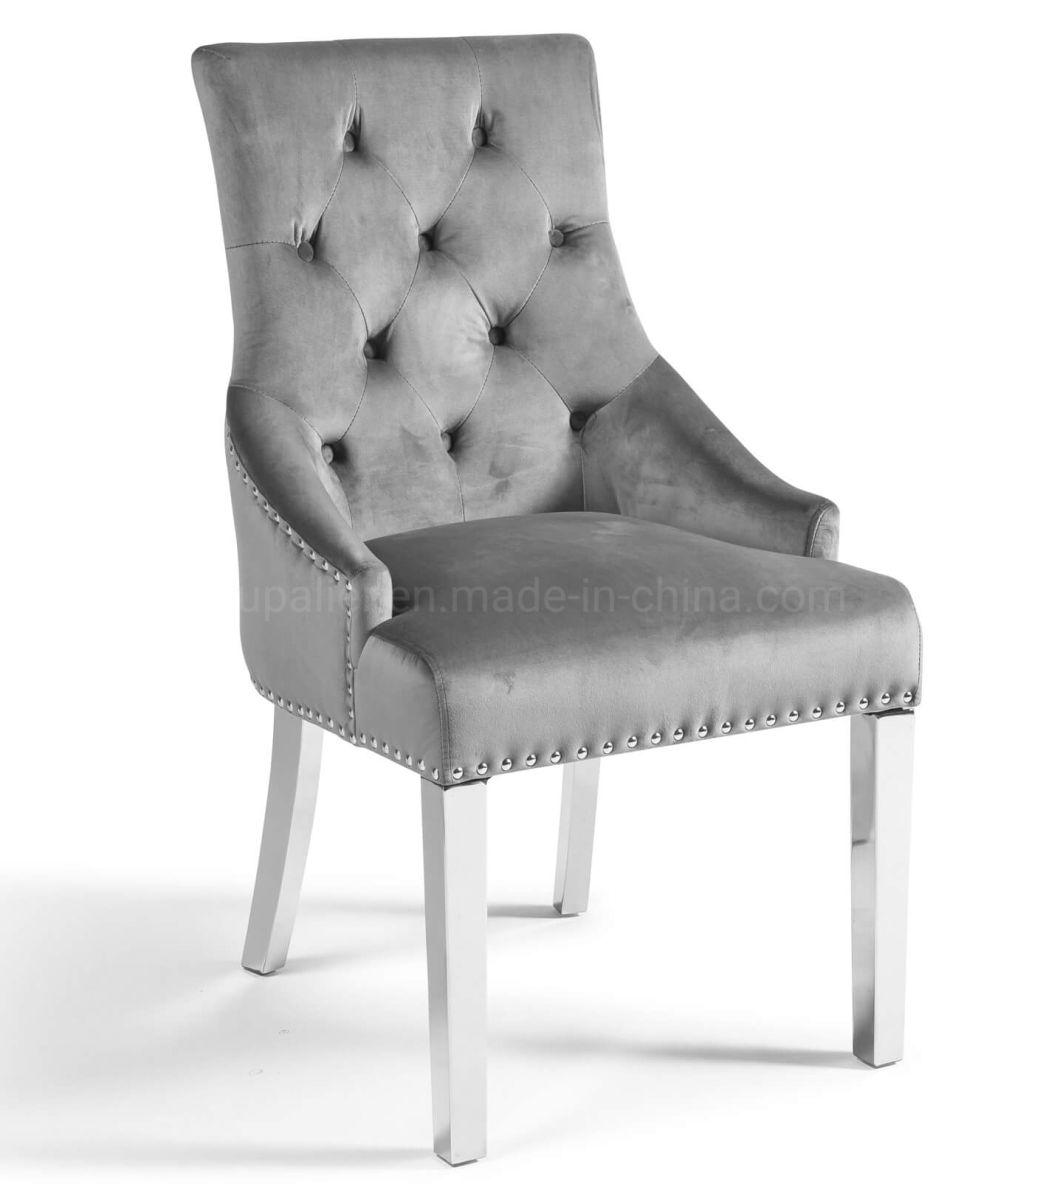 China Wholesale High Quality Hot Sale High Back Dining Chair